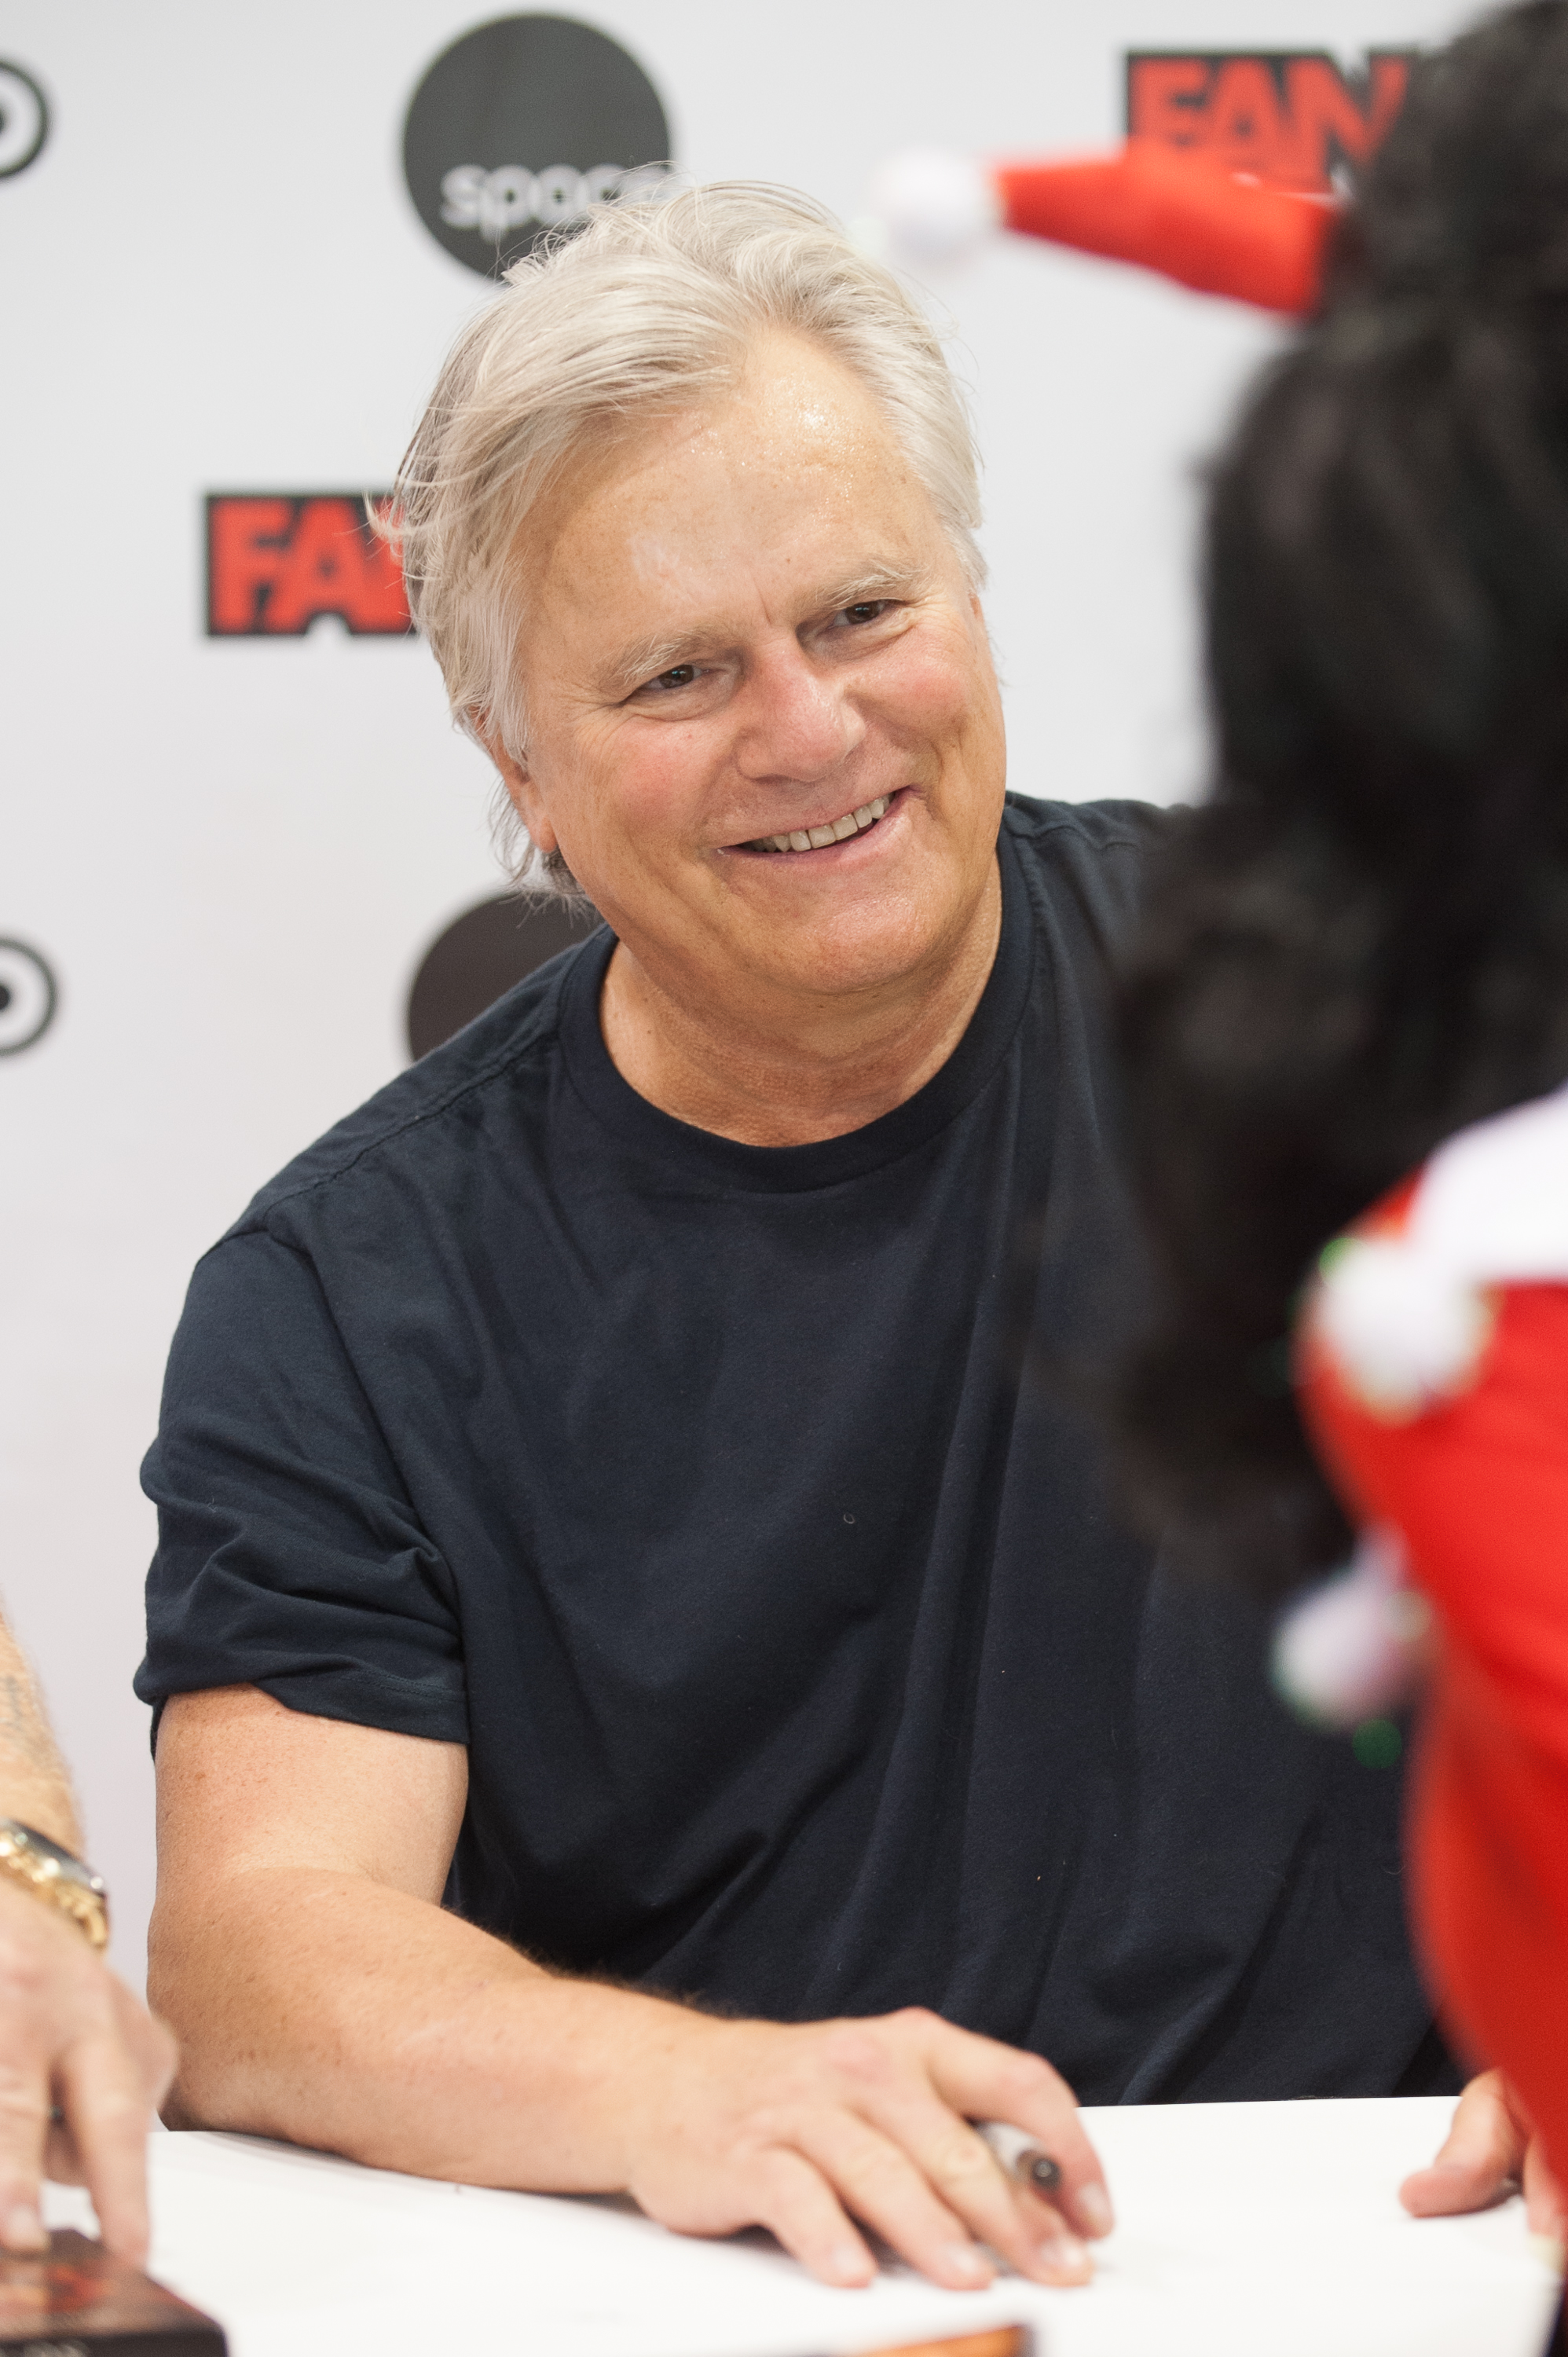 Richard Dean Anderson at Fan Expo Canada in 2018 | Source: Getty Images